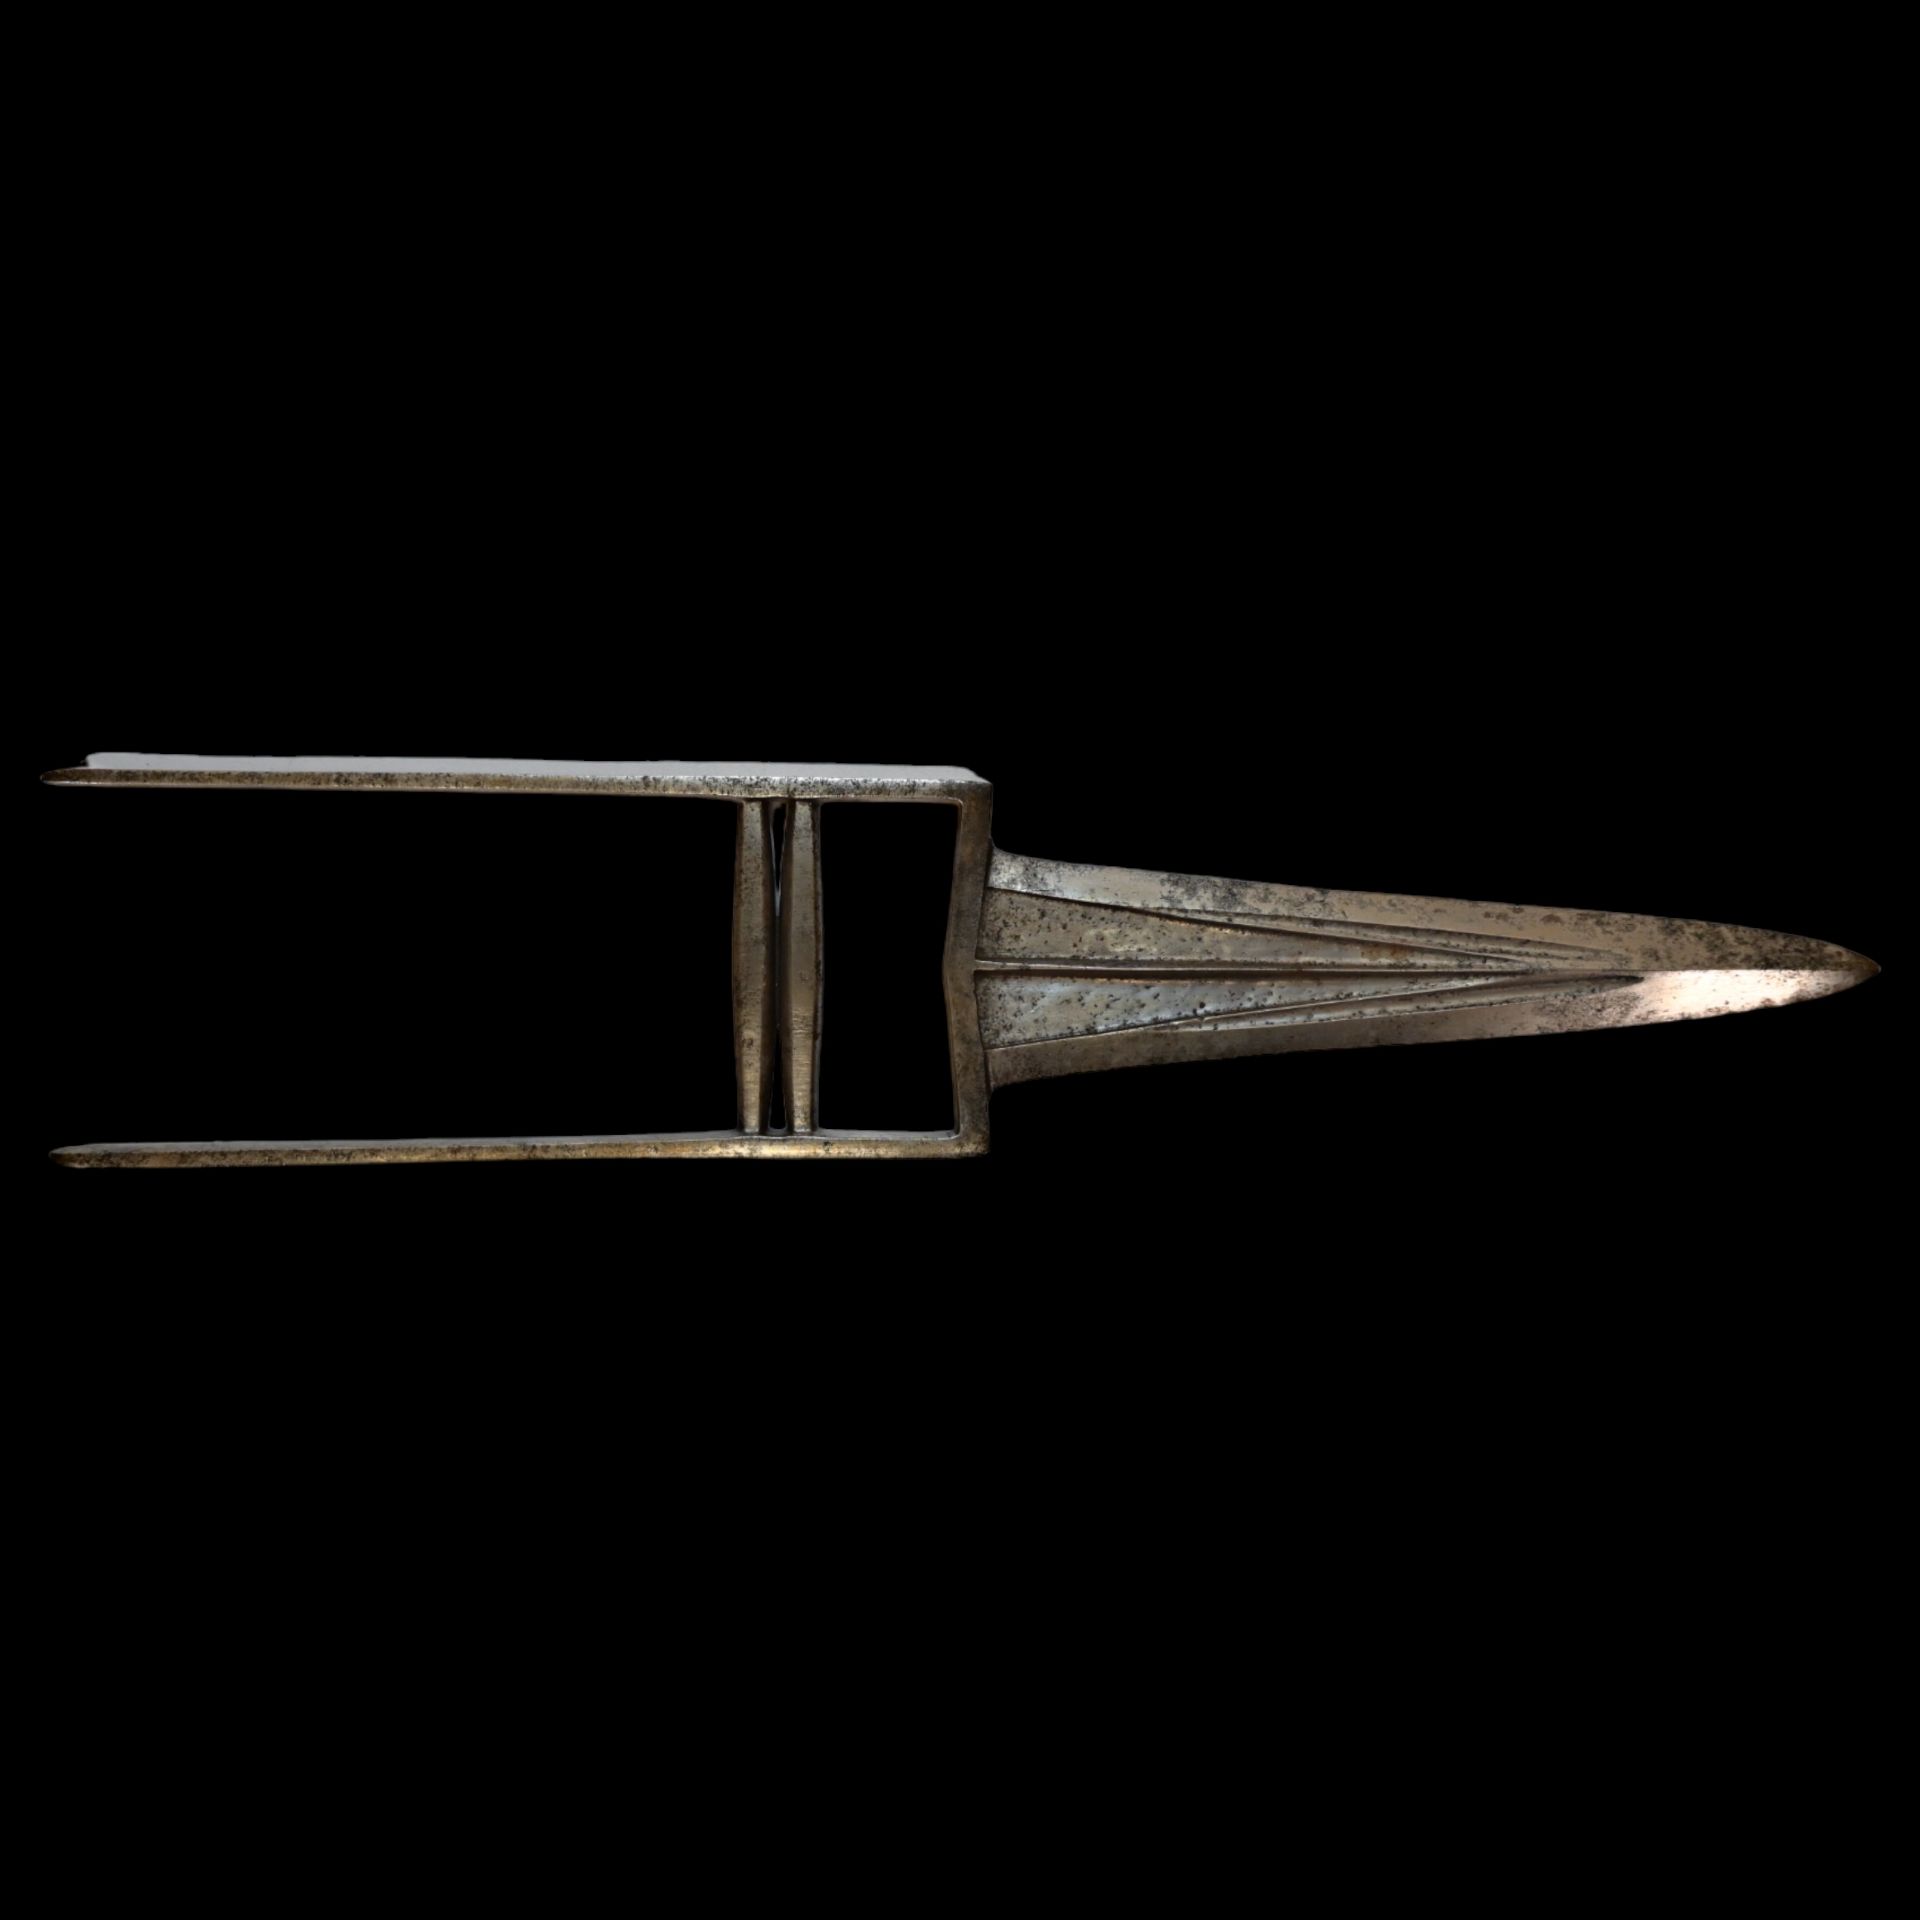 Indian Katar dagger, end of 18 century - Image 2 of 8